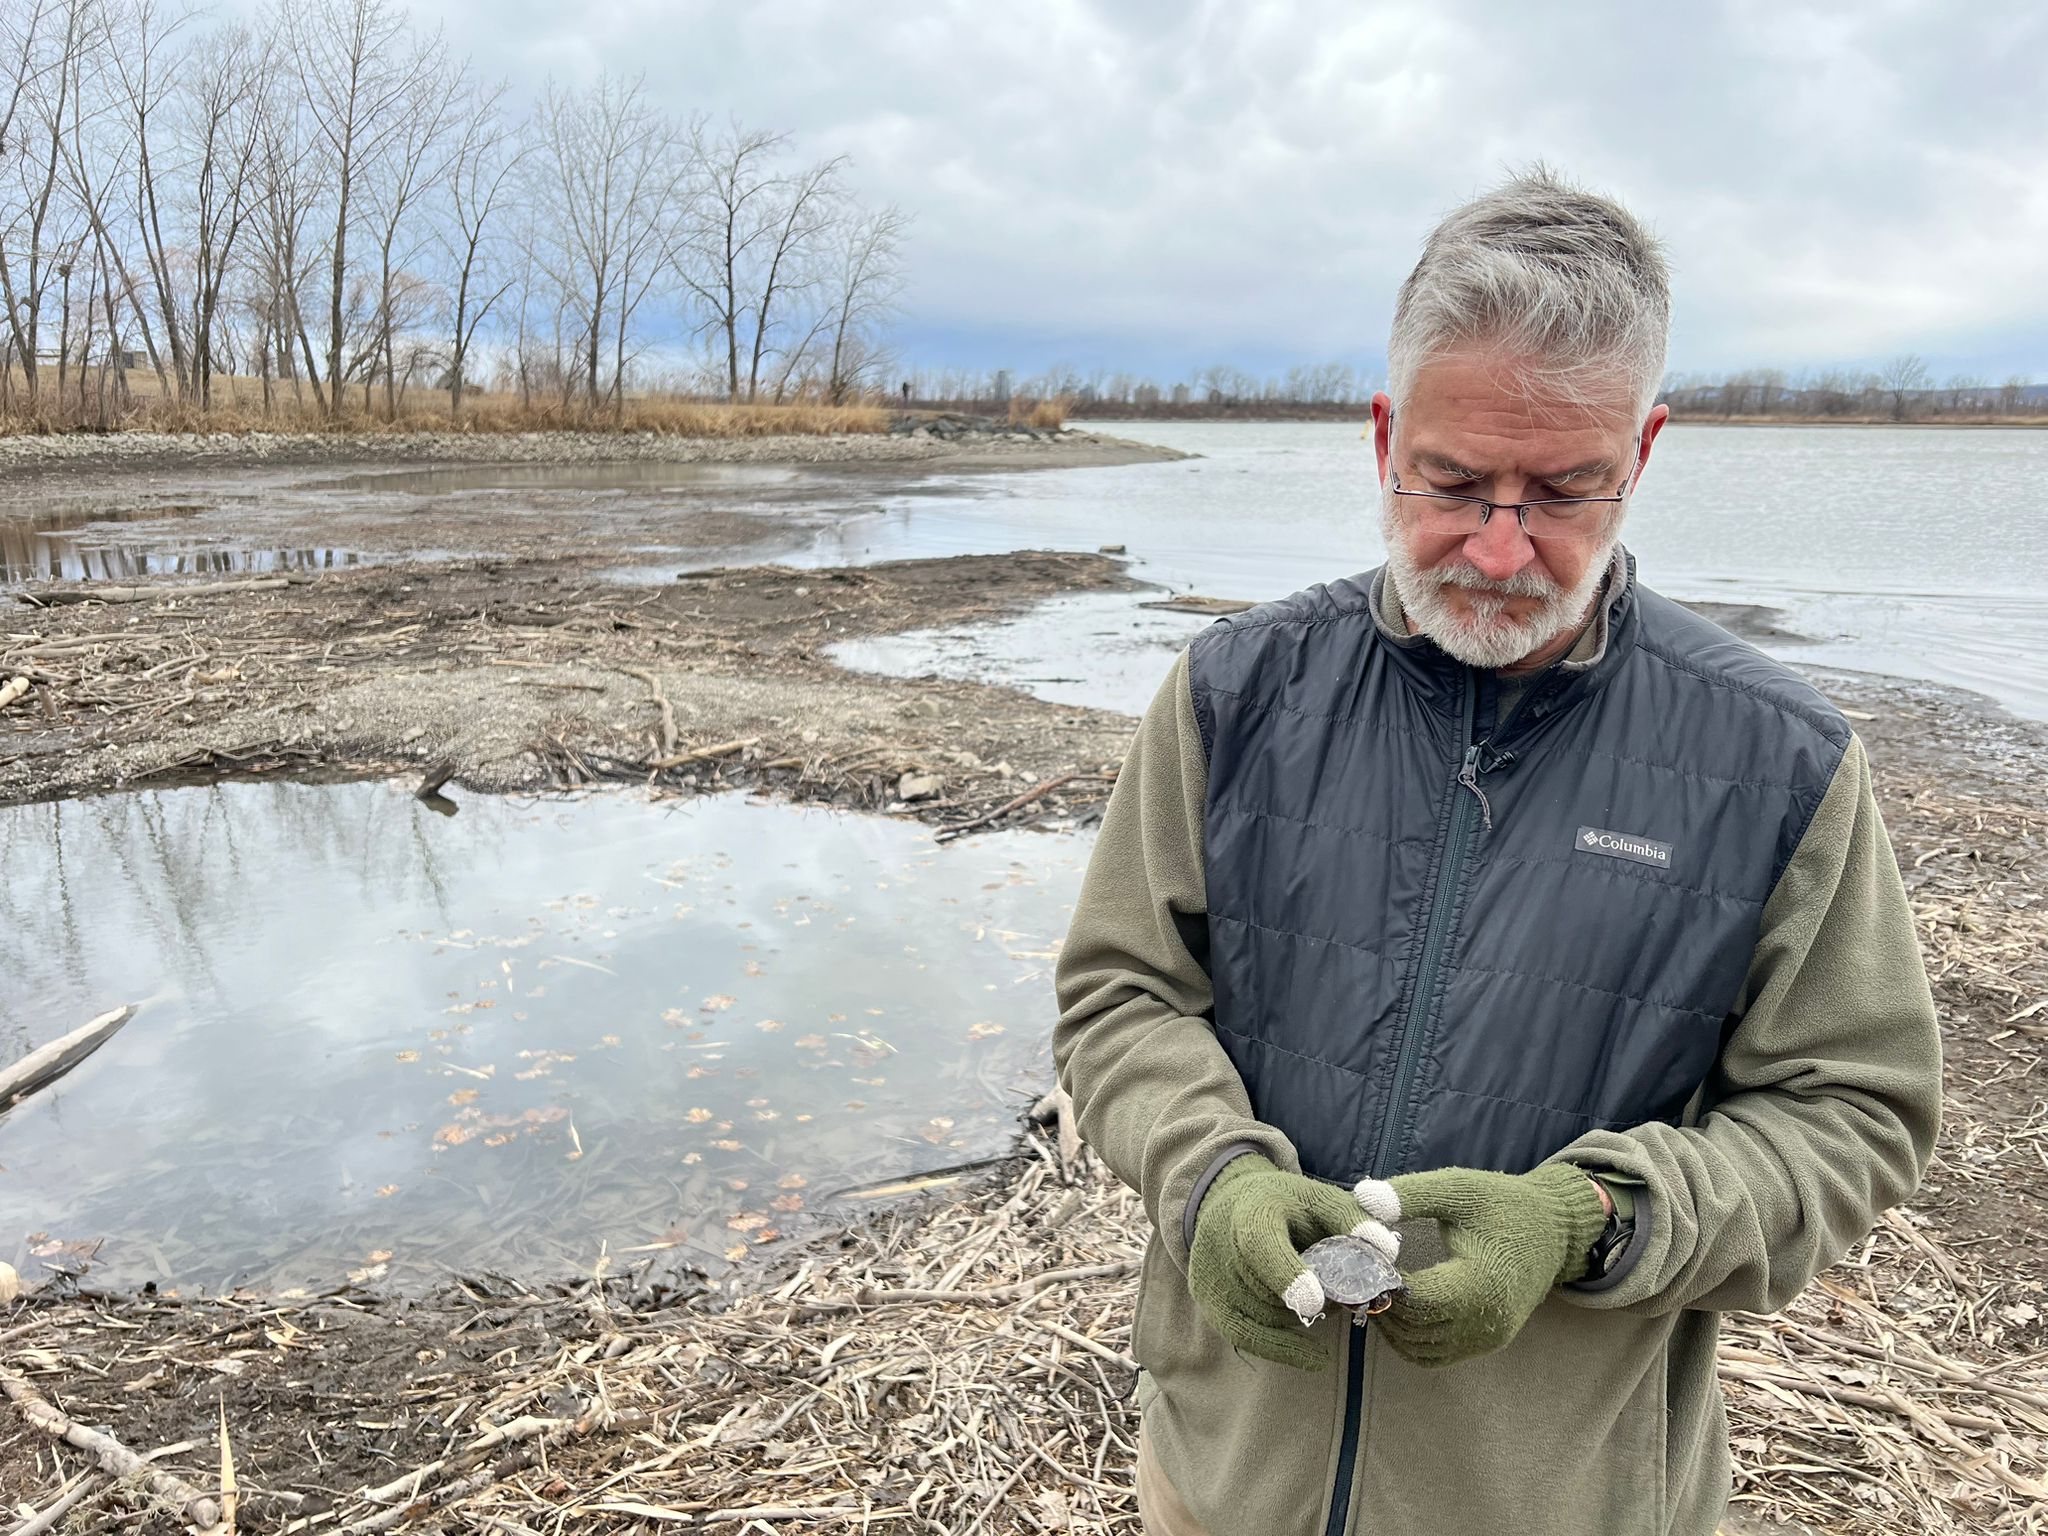 Hundreds of fish turned up dead in Quebec. Environmentalists want to know why